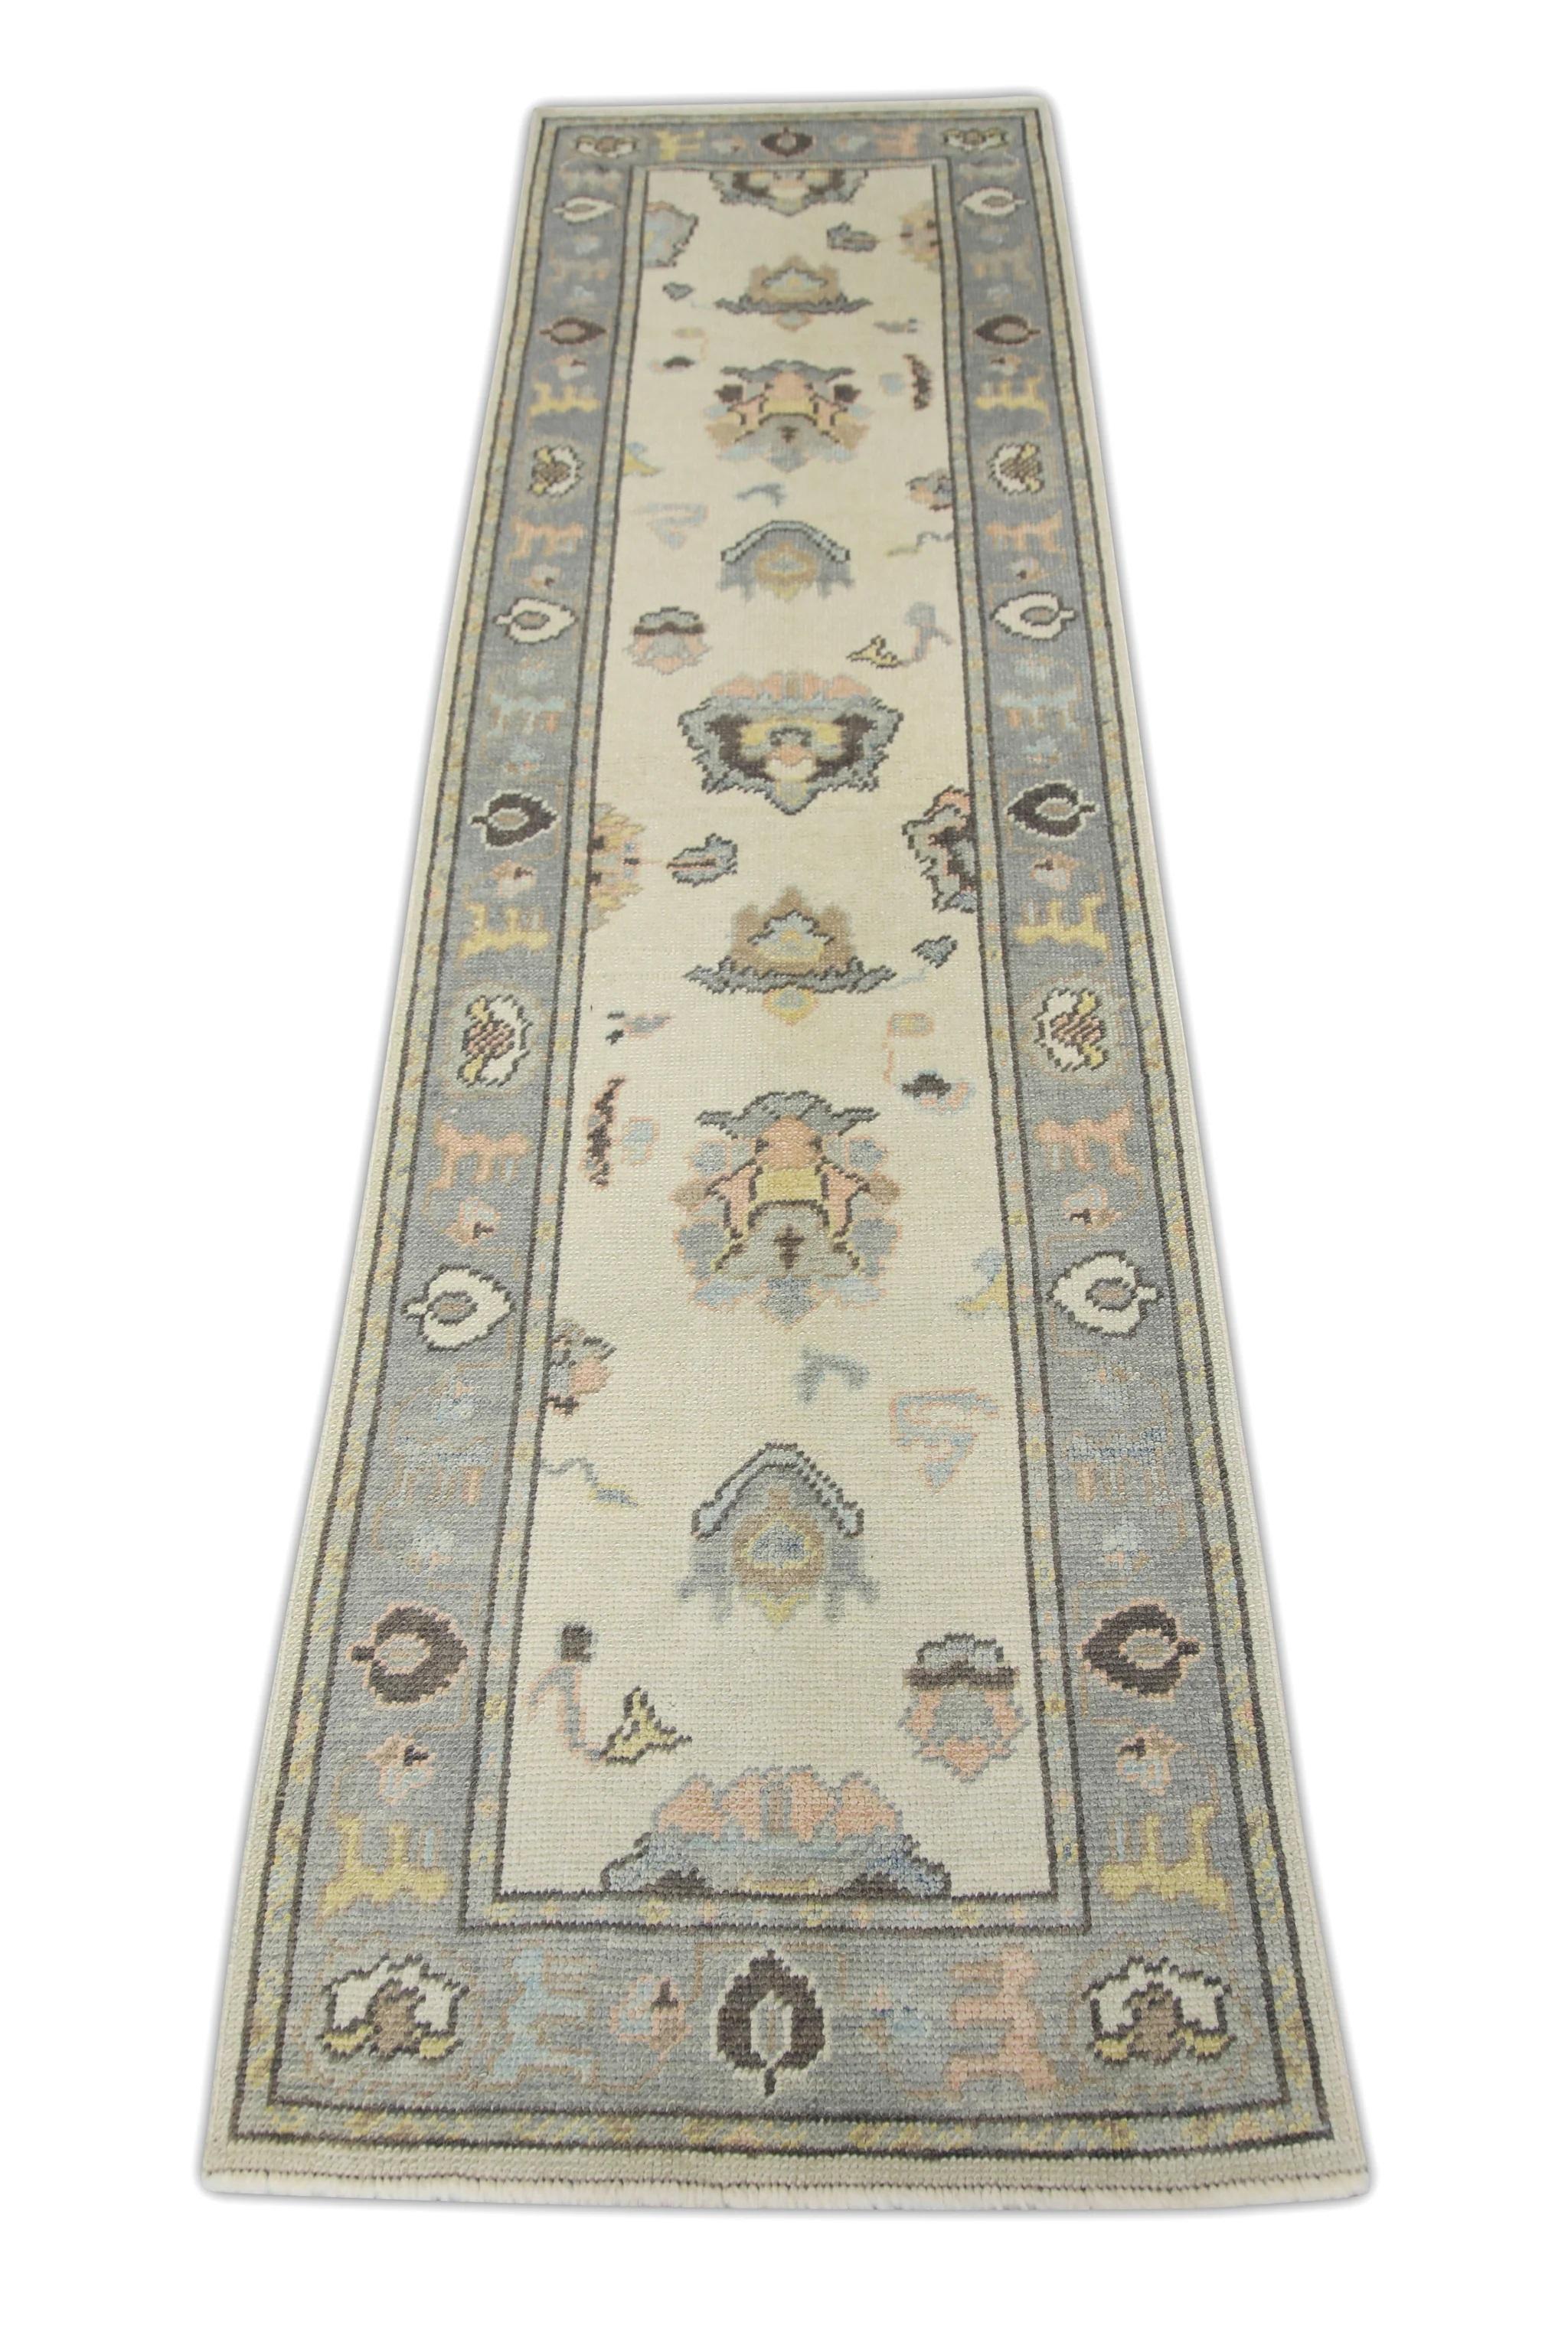 Contemporary Cream Handwoven Wool Turkish Oushak Rug in Multicolor Floral Design 2'6